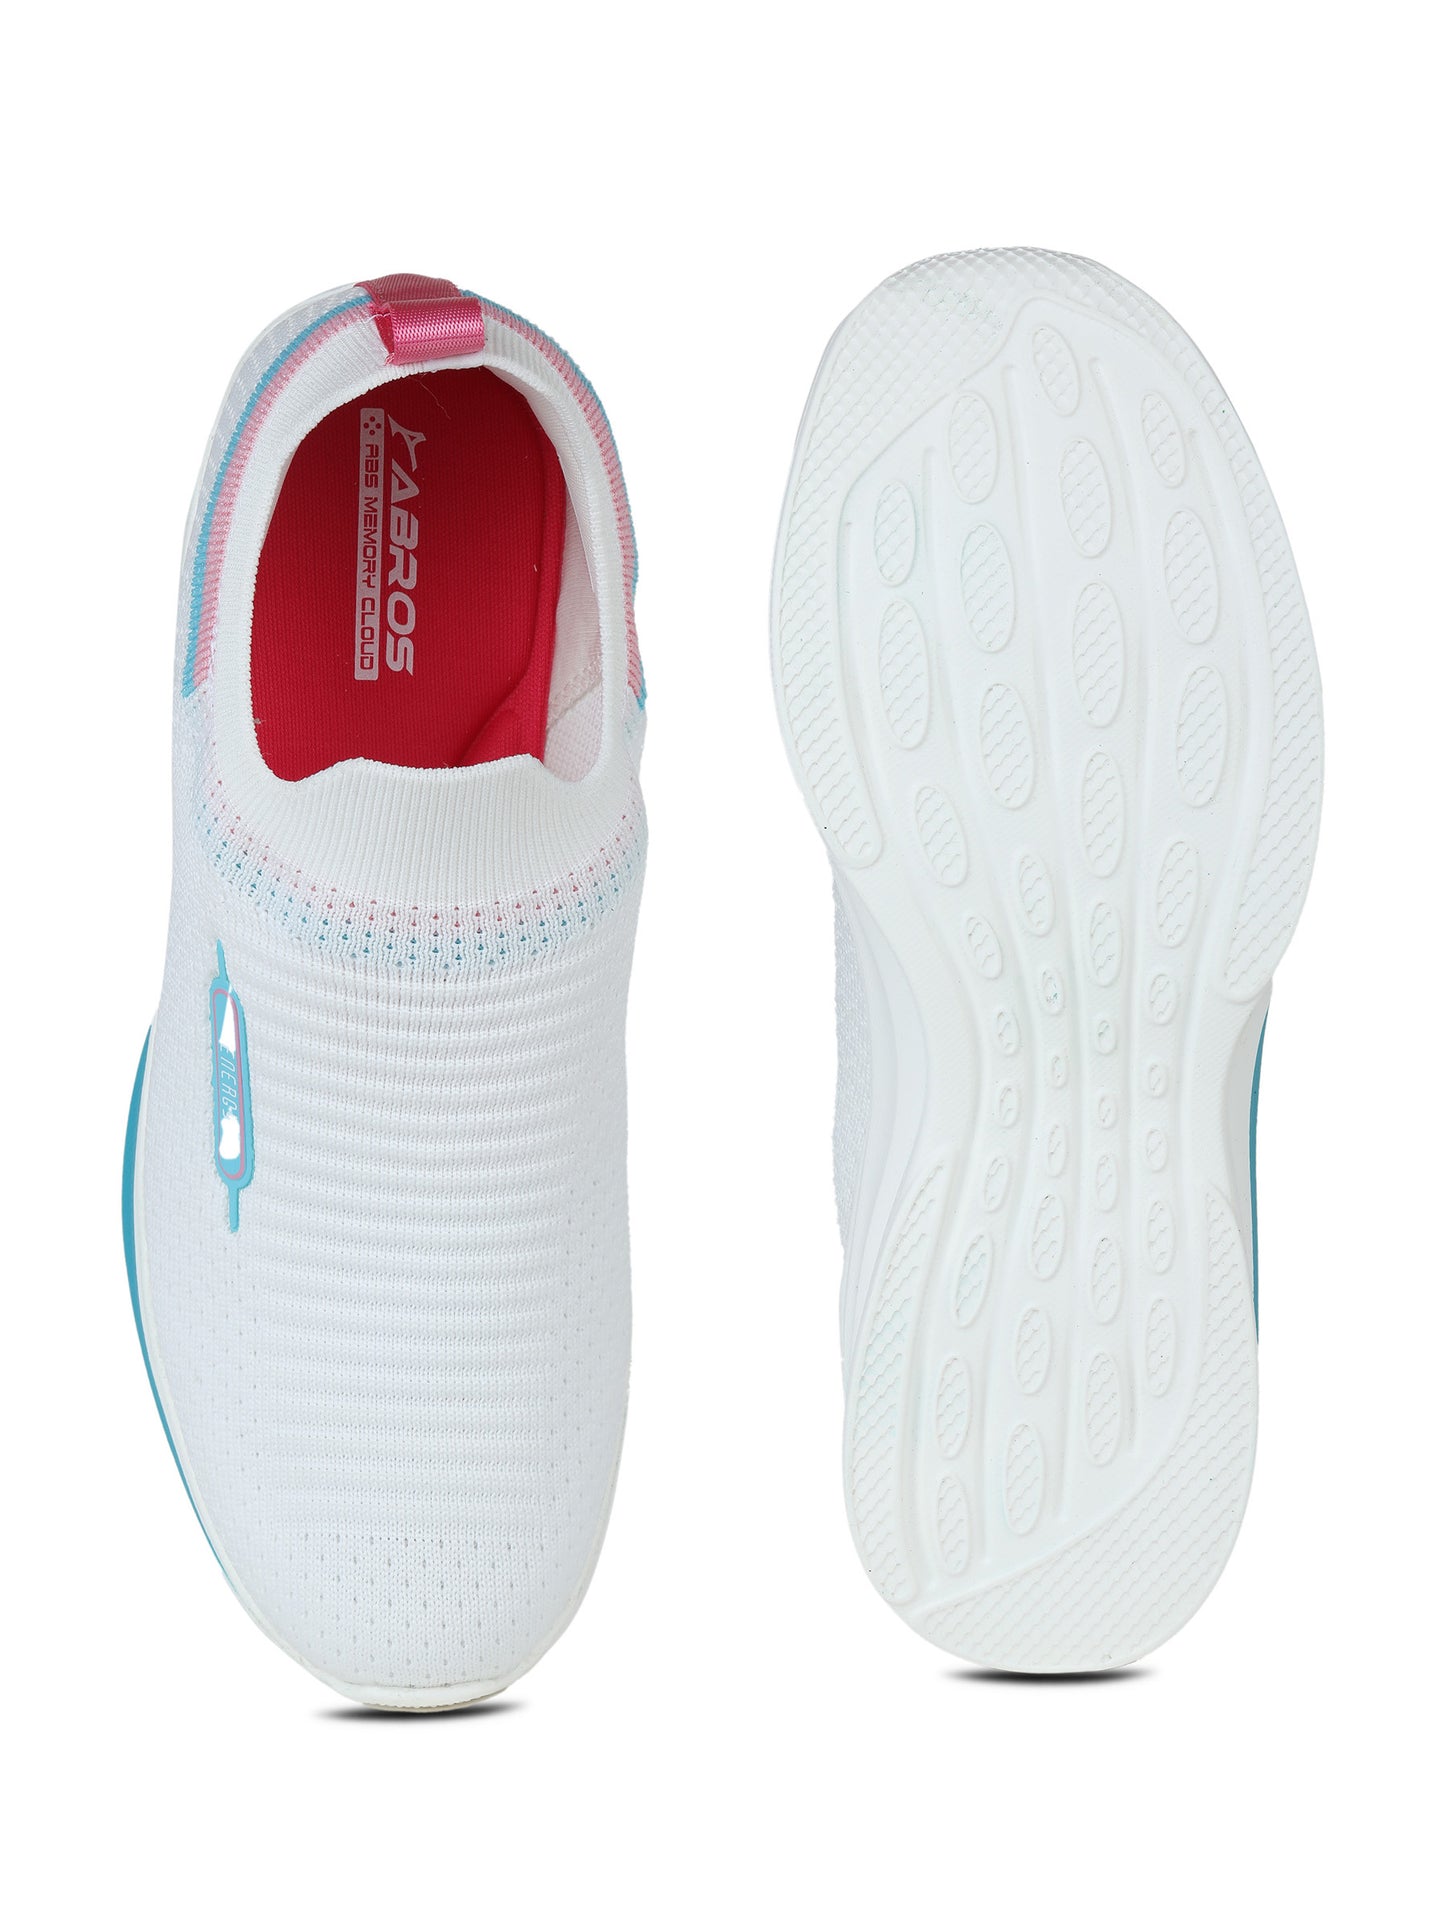 ABROS LILY-L SPORTS SHOES FOR WOMEN